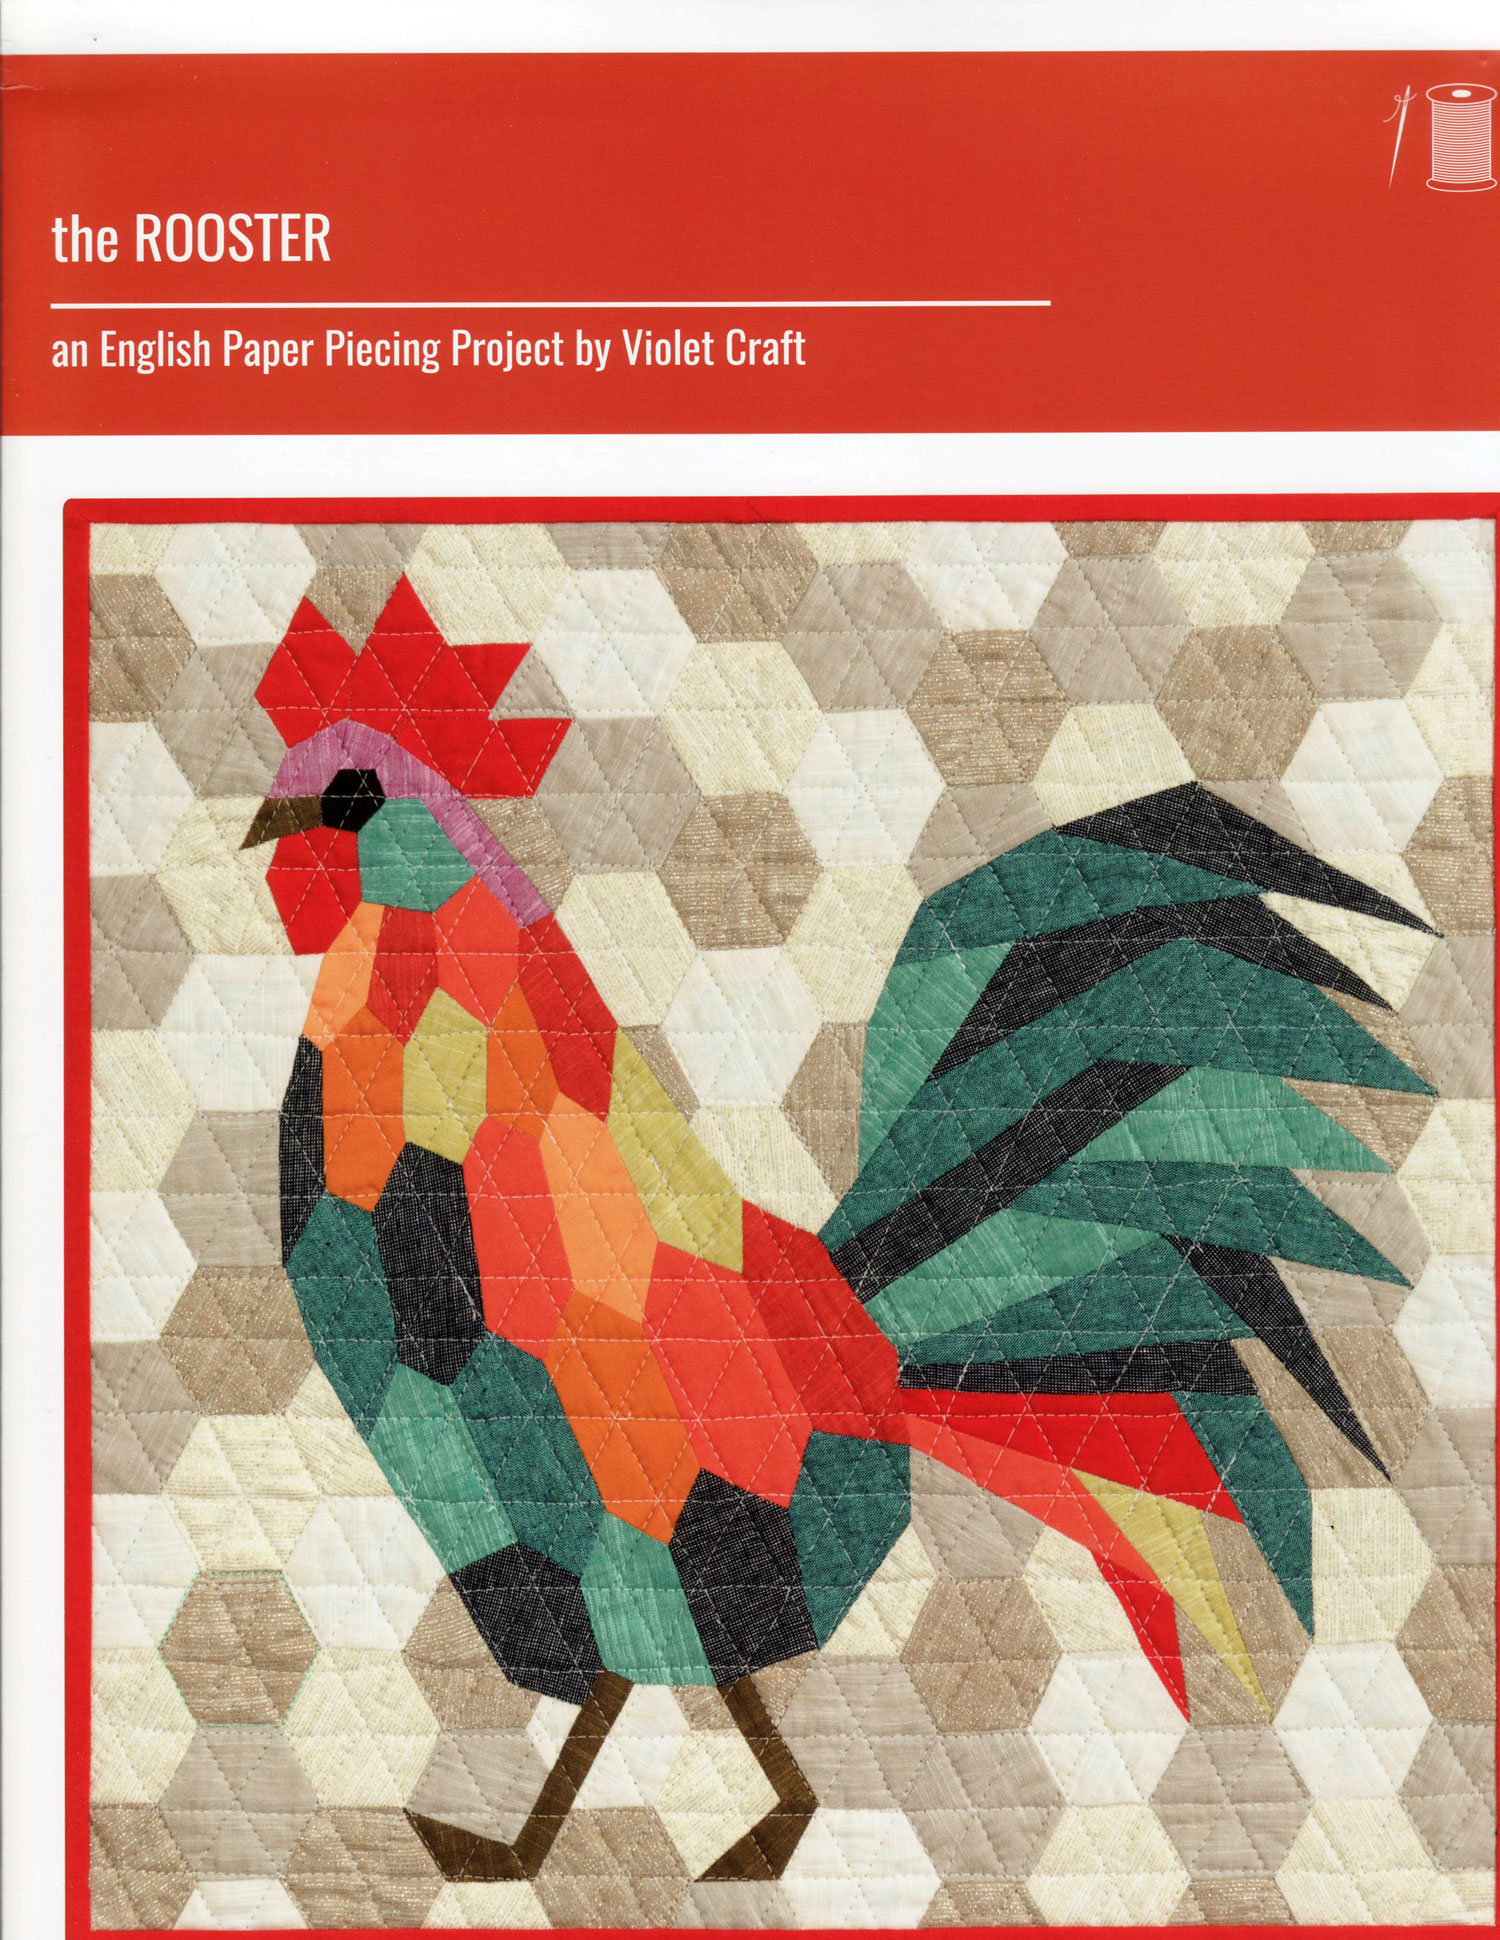 The-Rooster-English-Paper-Piecing-sewing-pattern-Violet-Craft-front